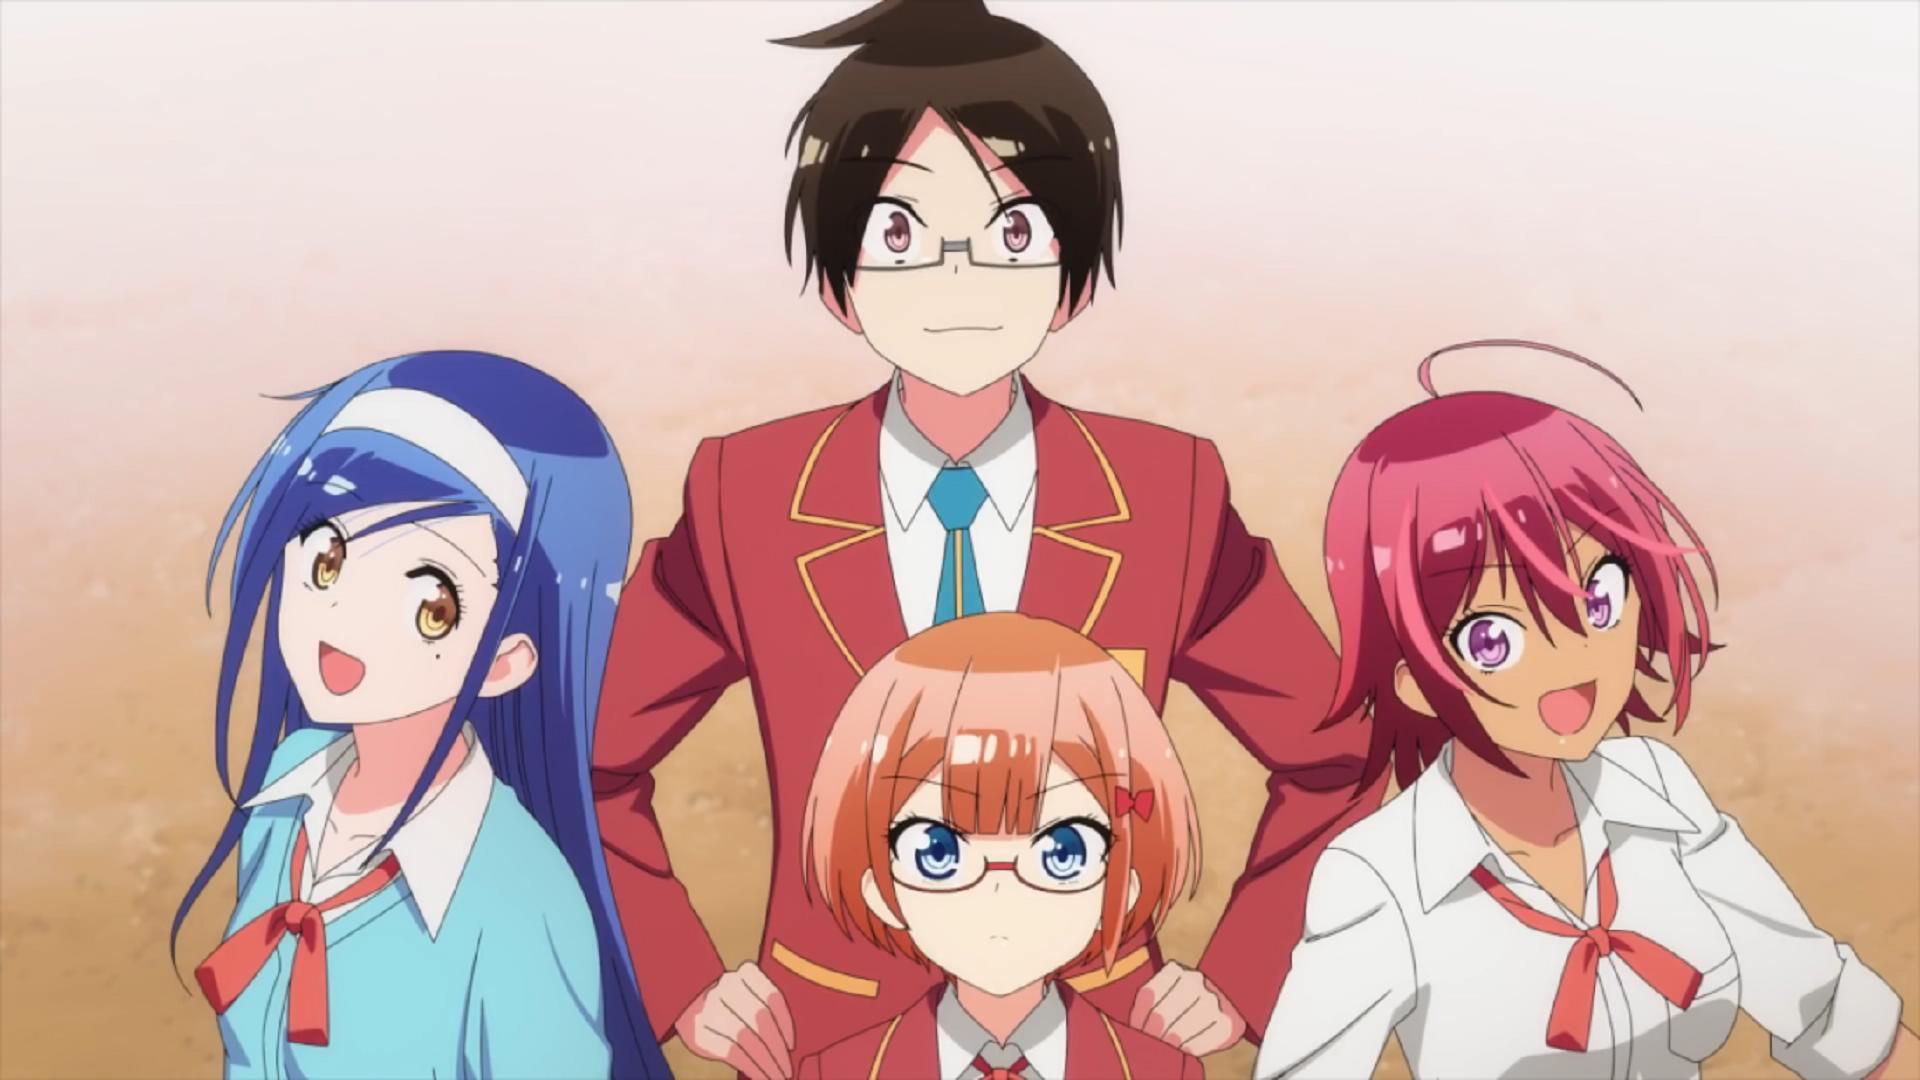 CHARACTER  We Never Learn: BOKUBEN Official USA Website